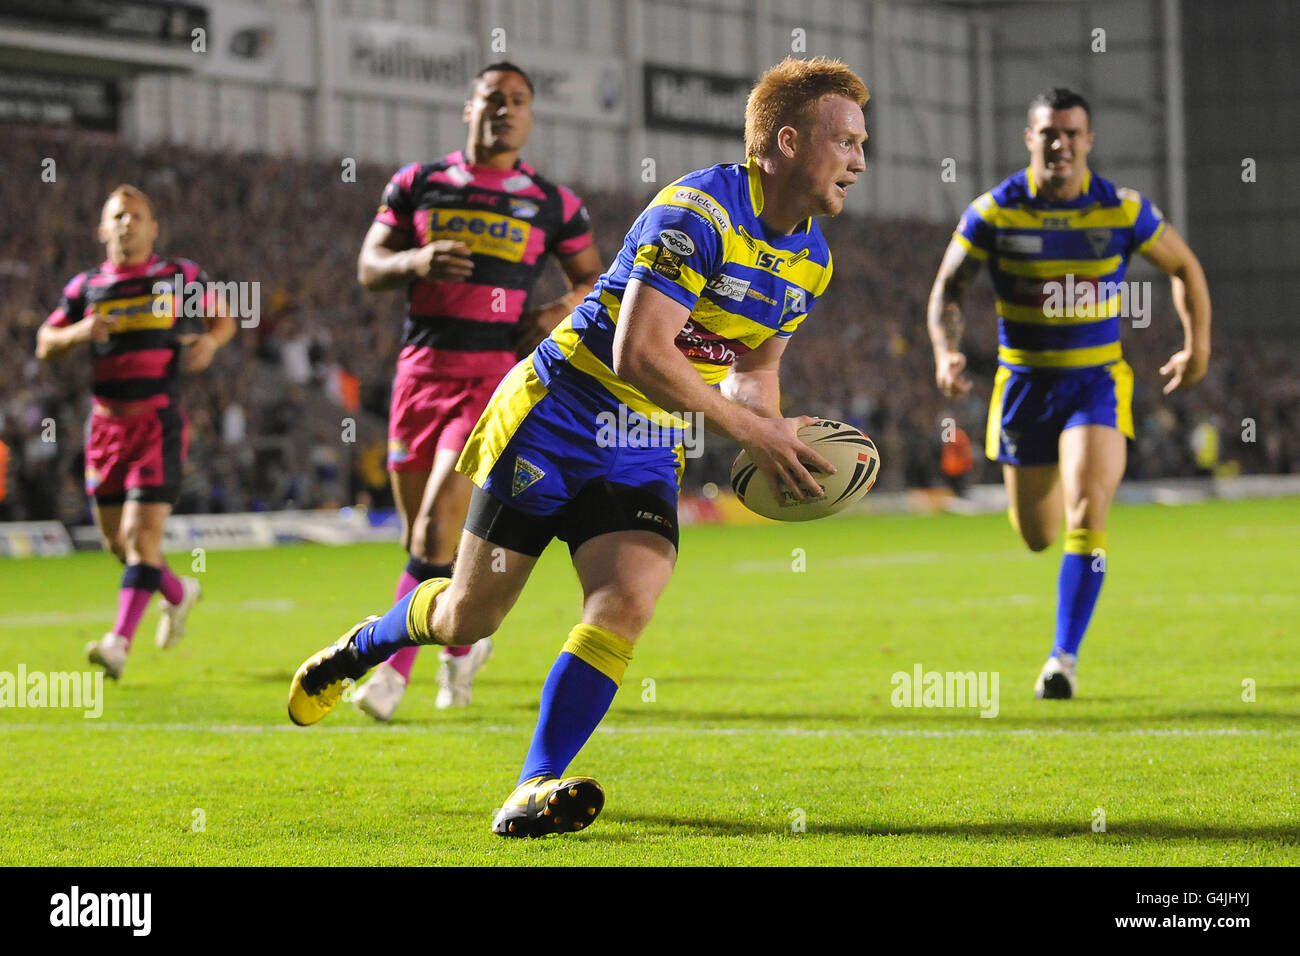 Warrington Wolves' Chris Riley goes over to score a try during the engage Super League, Semi Final match at the Halliwell Jones Stadium, Warrington. Stock Photo